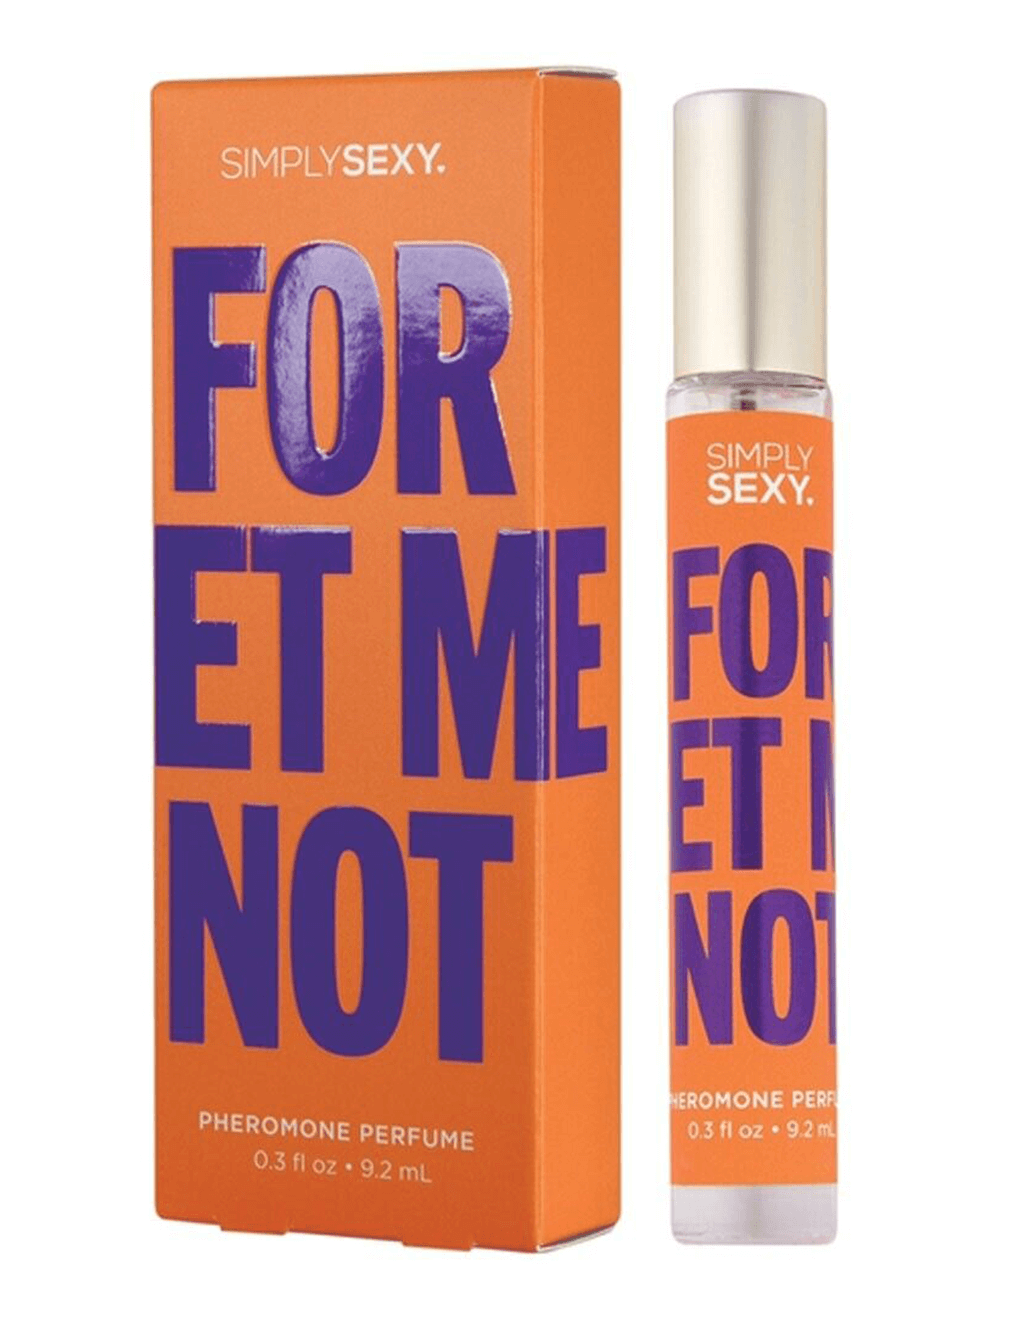 Simply Sexy Forget Me Not Pheromone Perfume - Product With Box